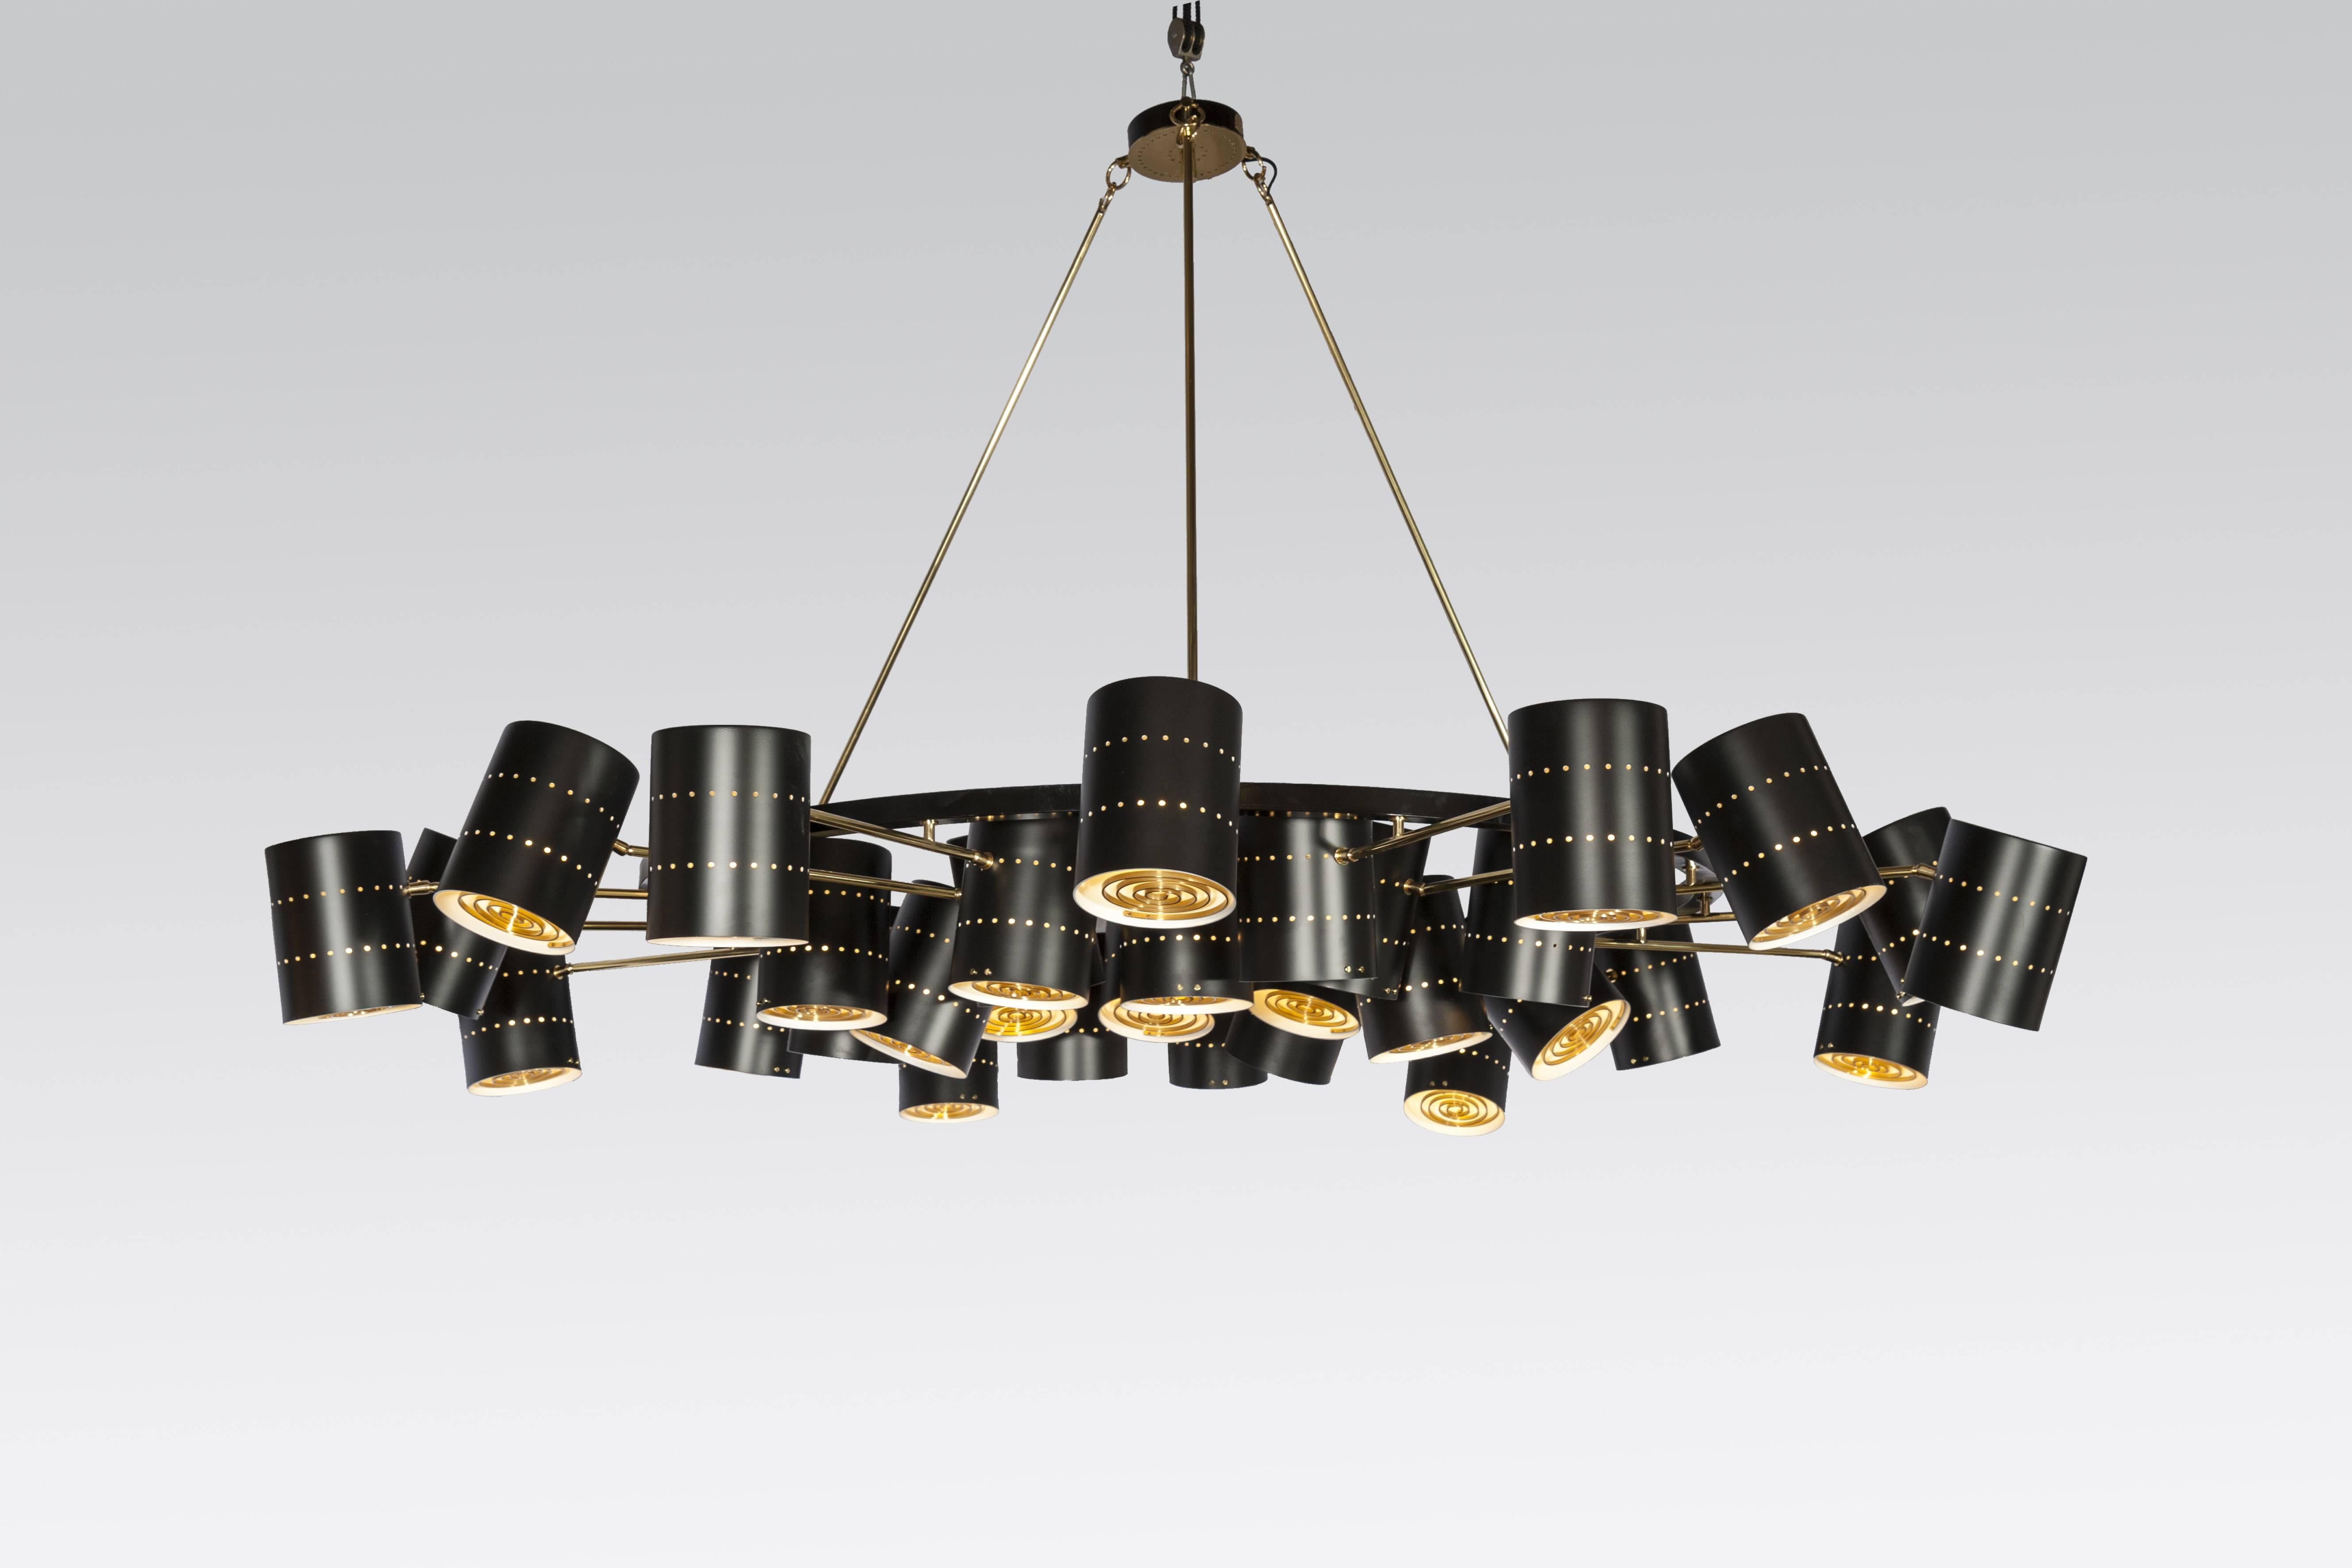 Contemporary chandelier by Stan Usel, 
The art of tailor made furniture....
All the chandelier can made on mesure...
do not hesitate to ask me for technical plans...